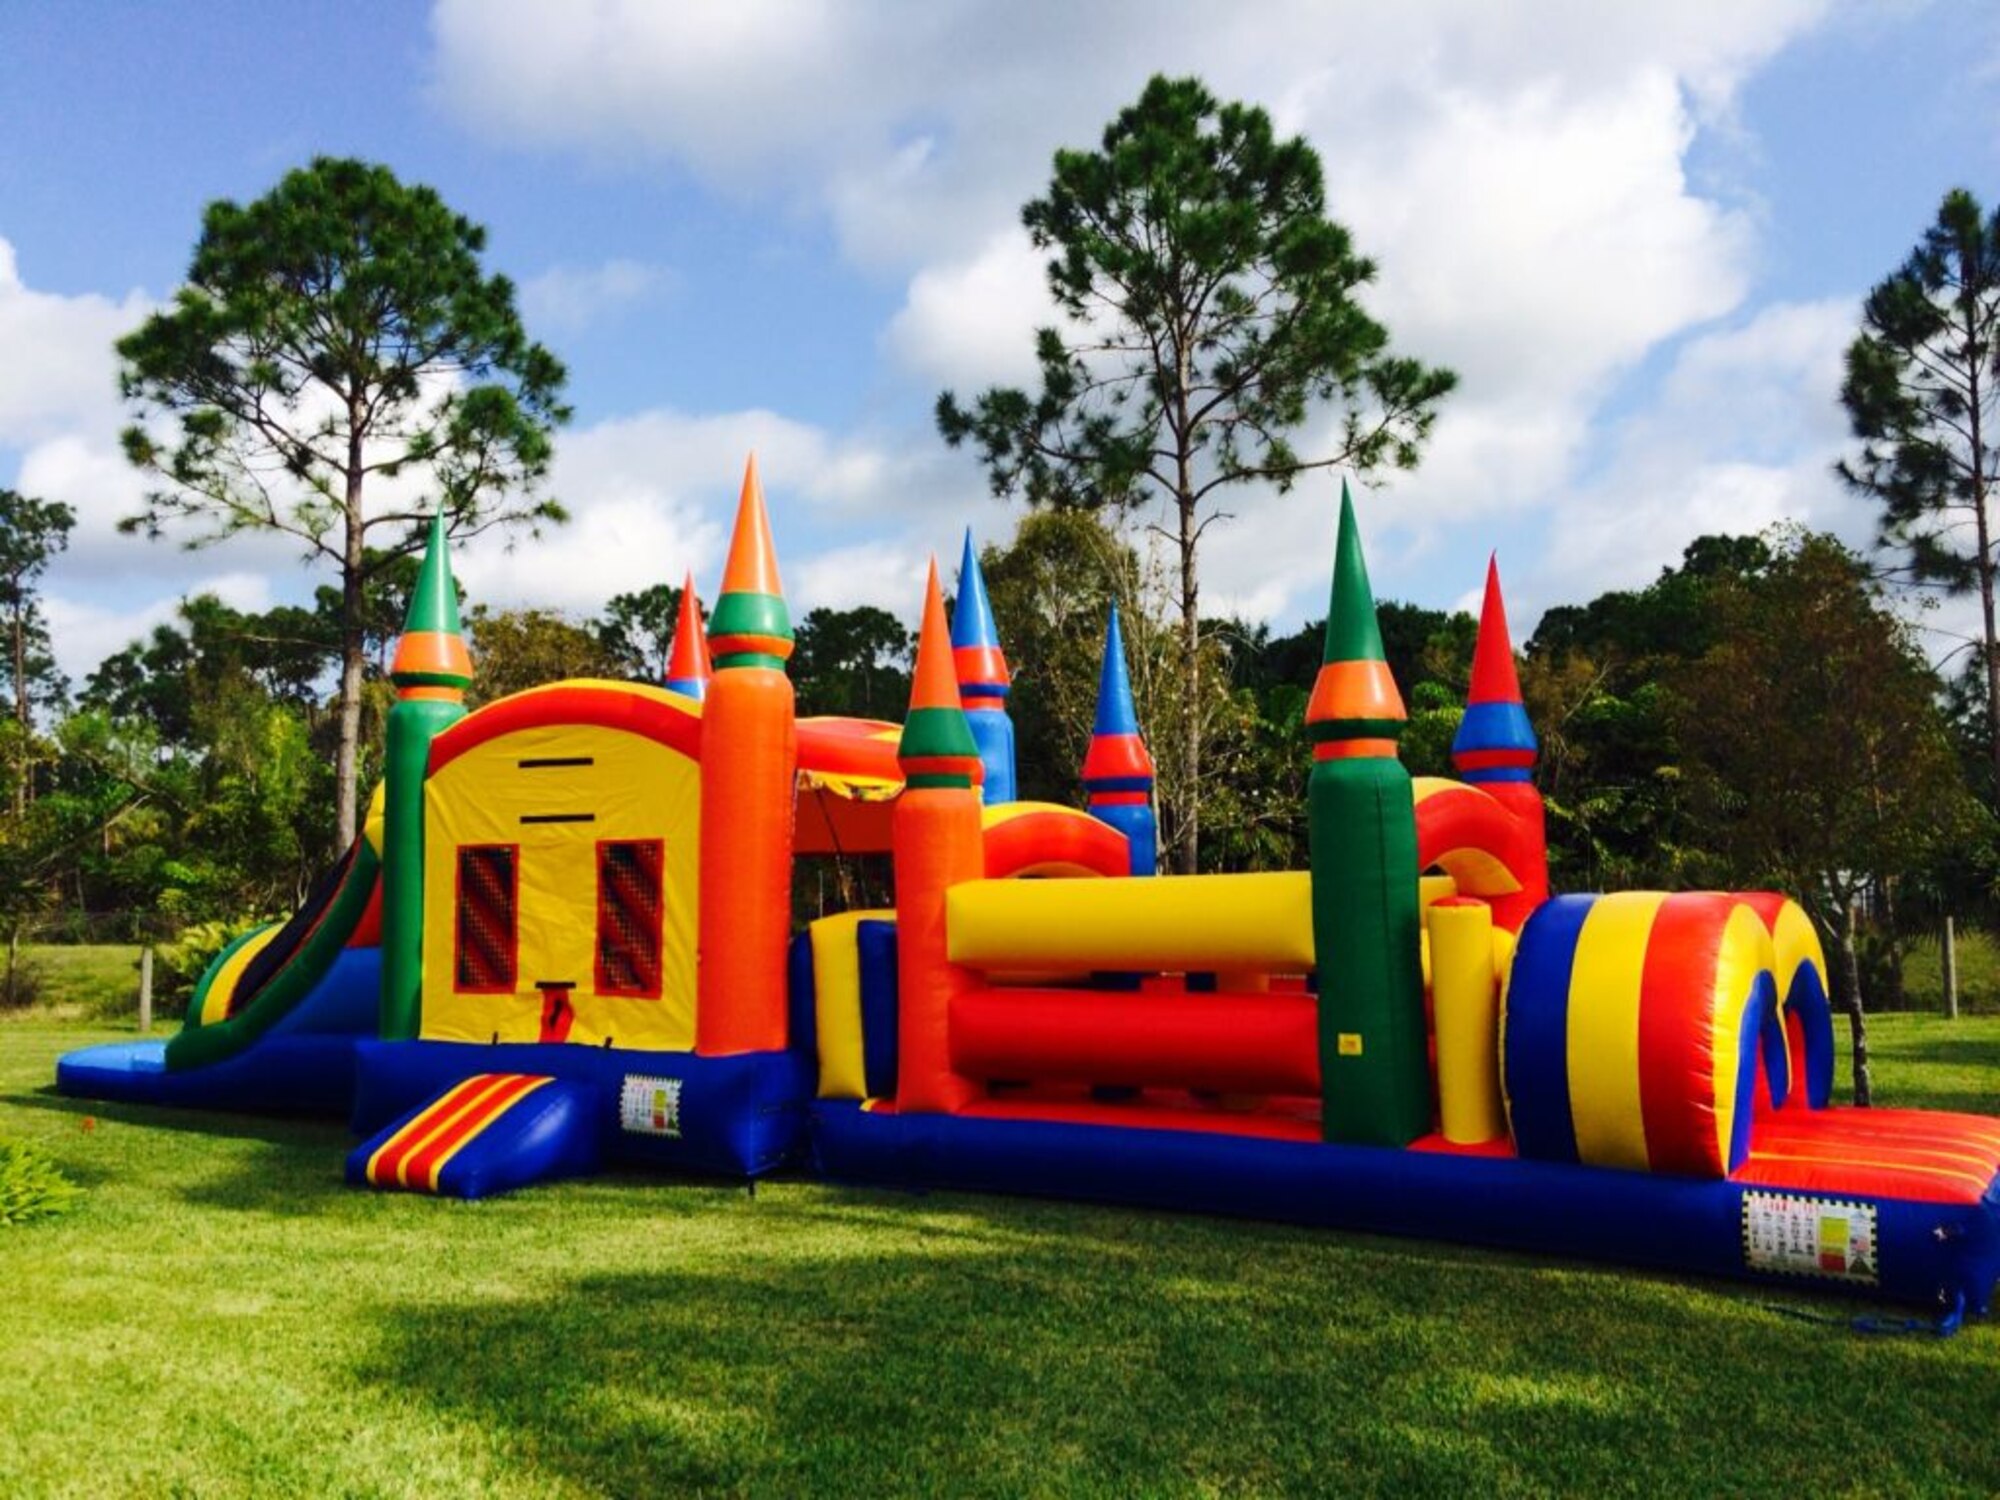 A bouncy house sits ready for use for children. The 49th Wing Safety office recommends following all bouncy house safety procedures when using a bouncy house. (Courtesy photo)